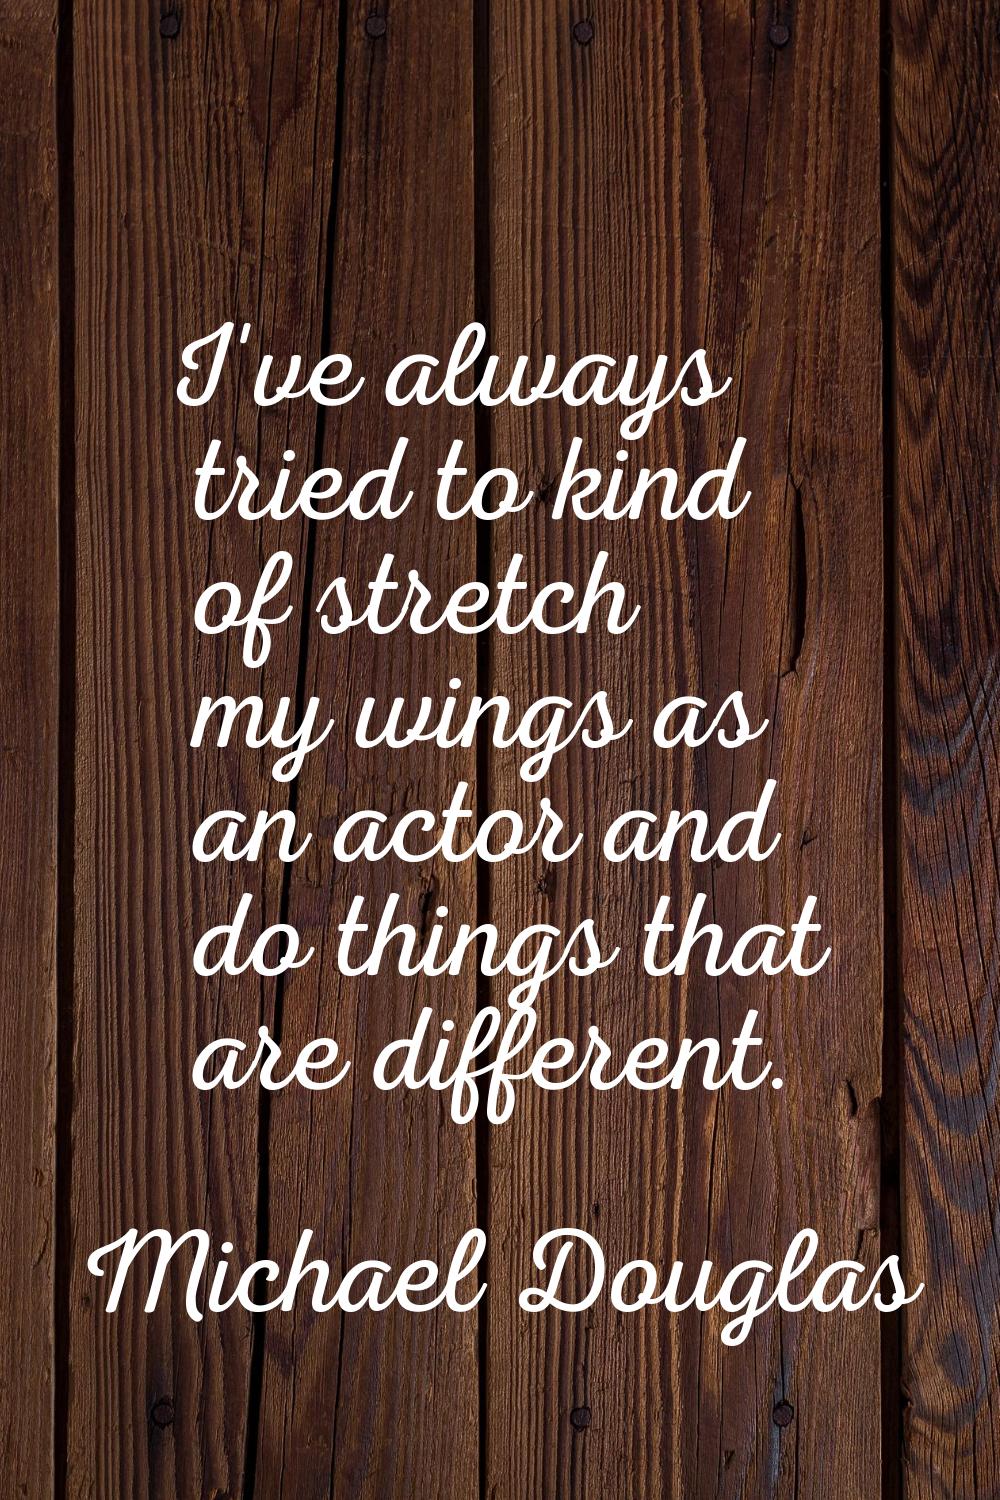 I've always tried to kind of stretch my wings as an actor and do things that are different.